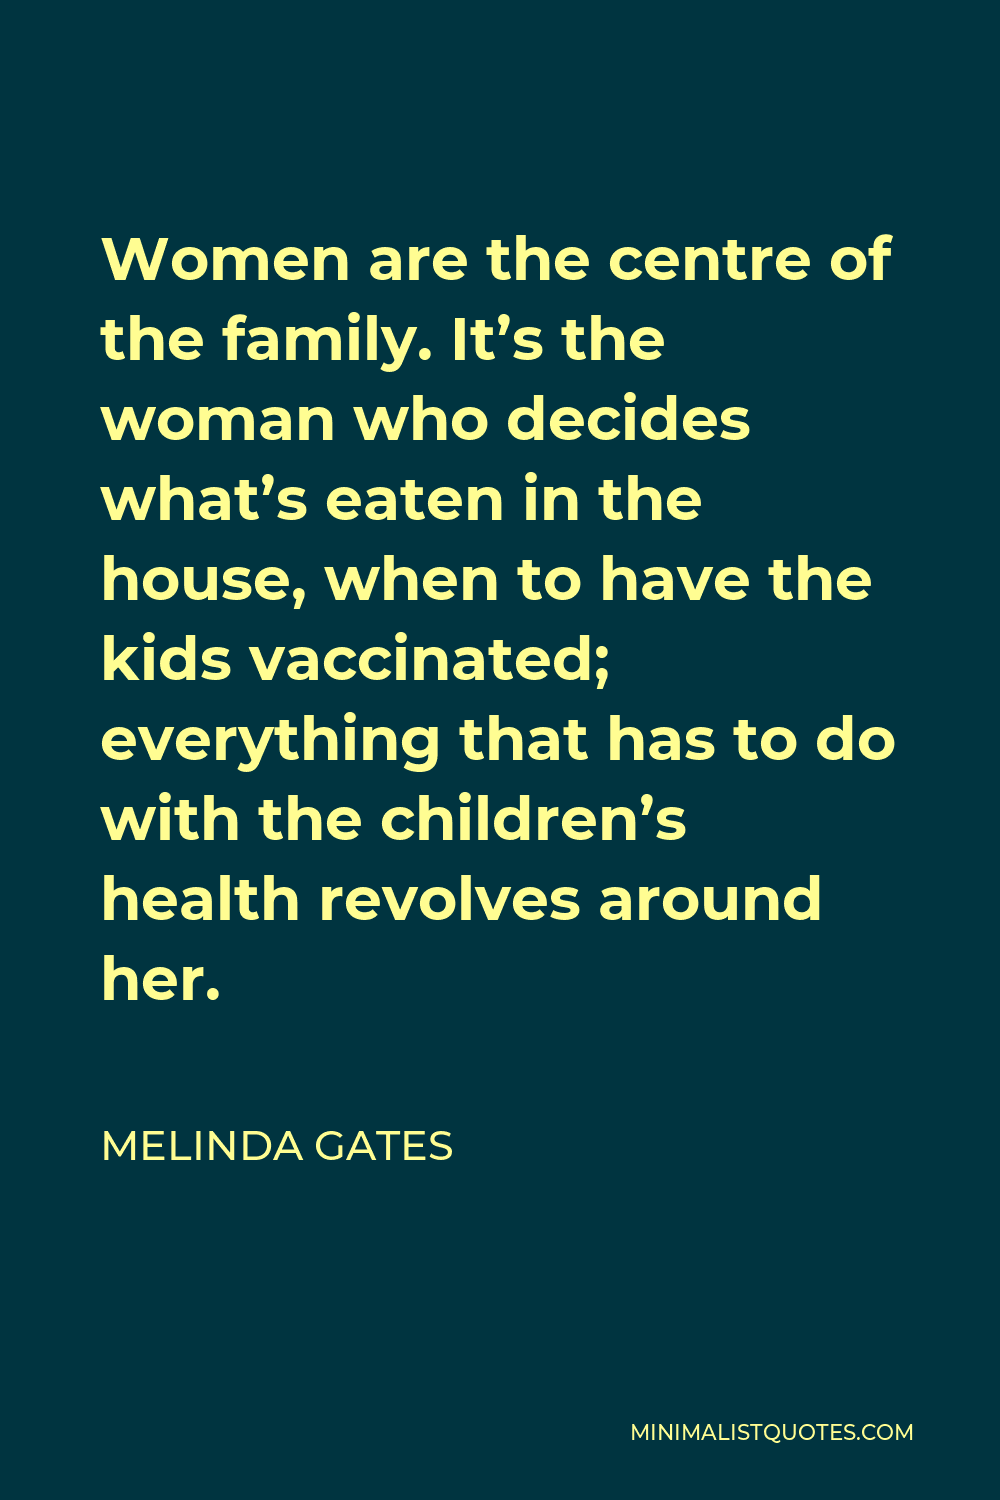 Melinda Gates Quote - Women are the centre of the family. It’s the woman who decides what’s eaten in the house, when to have the kids vaccinated; everything that has to do with the children’s health revolves around her.